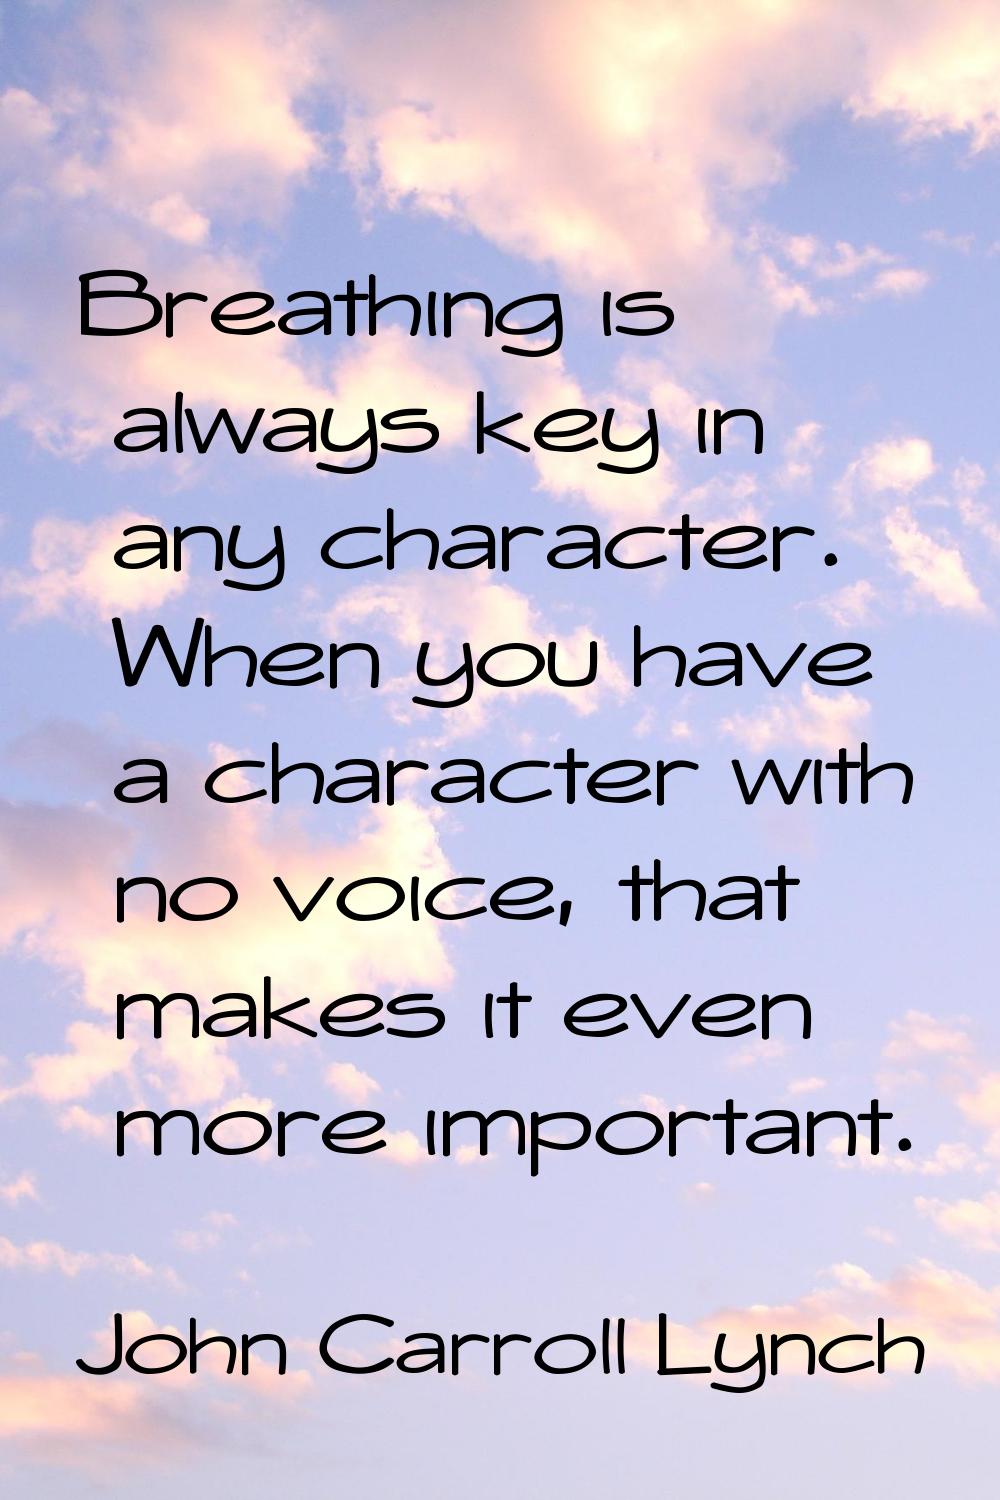 Breathing is always key in any character. When you have a character with no voice, that makes it ev